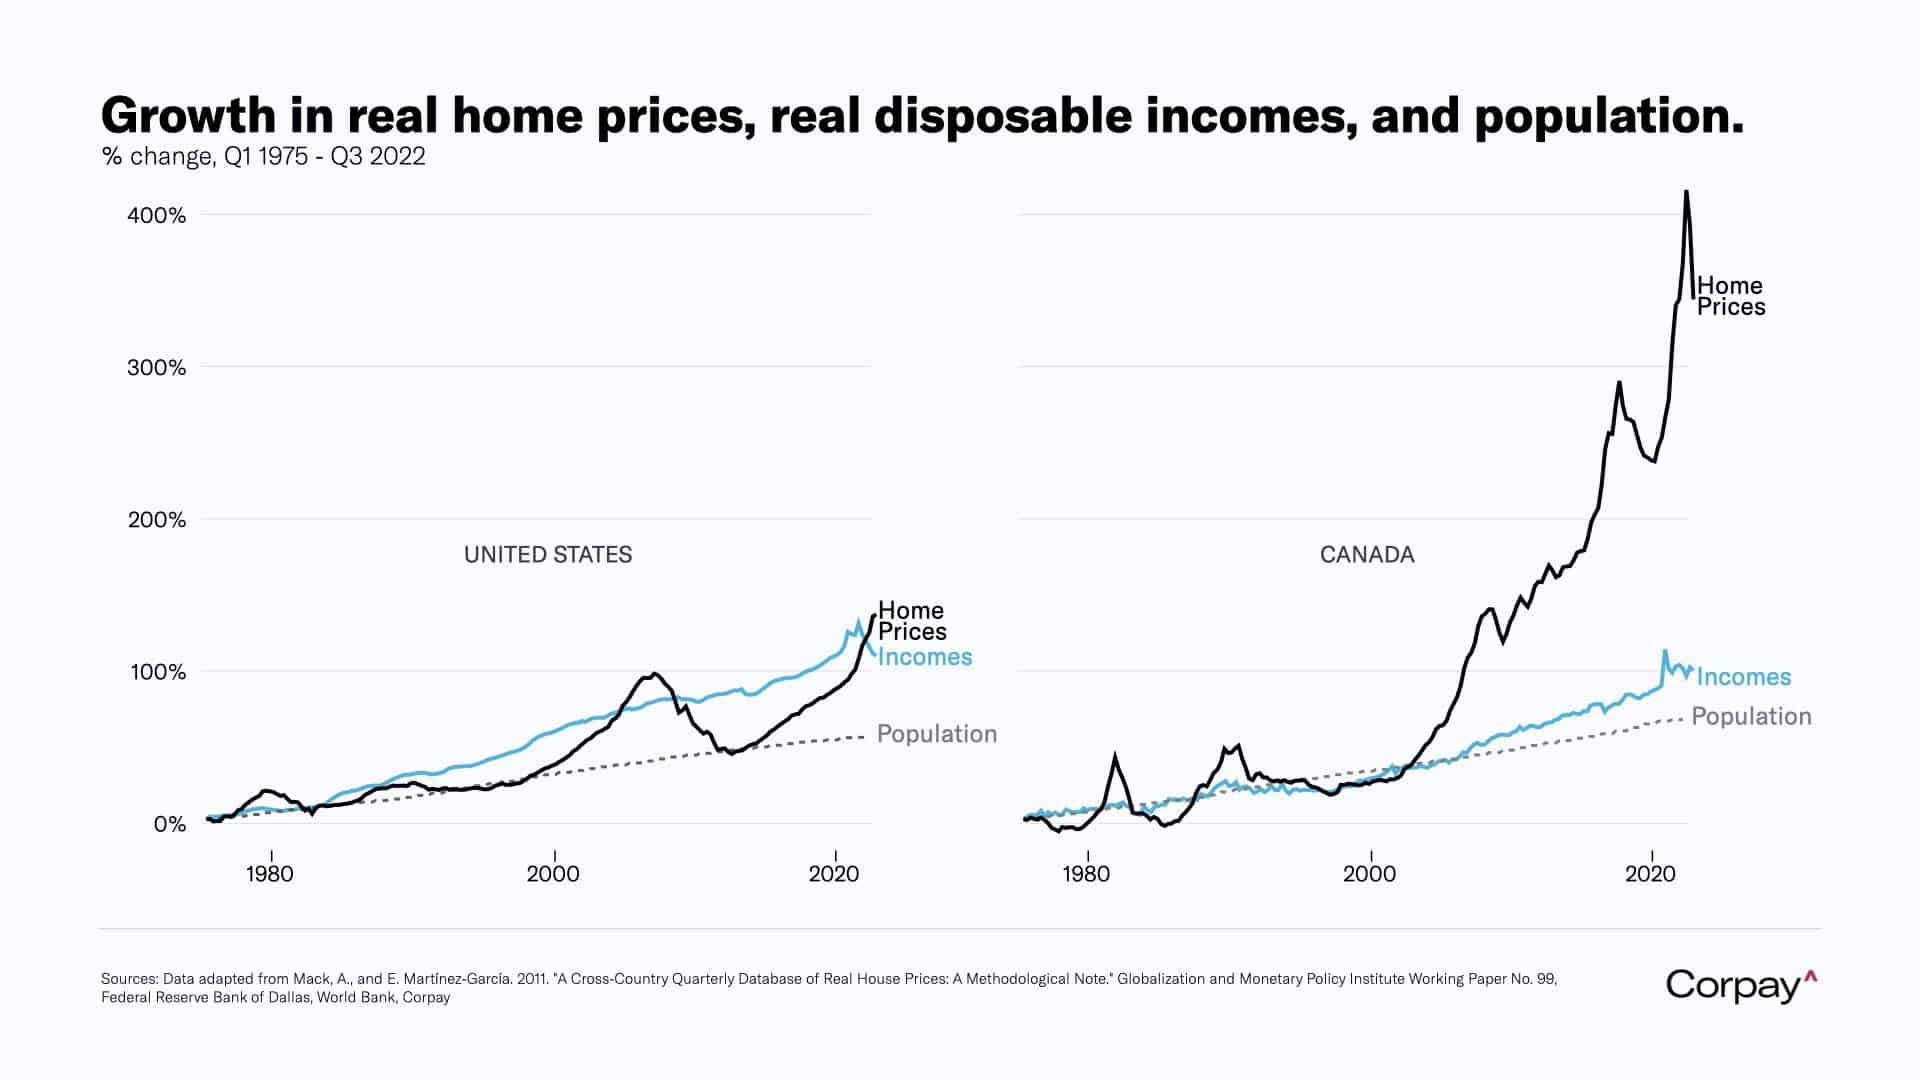 Chart of U.S. vs. Canadian housing markets (and income) from 1975 to Q3 2022